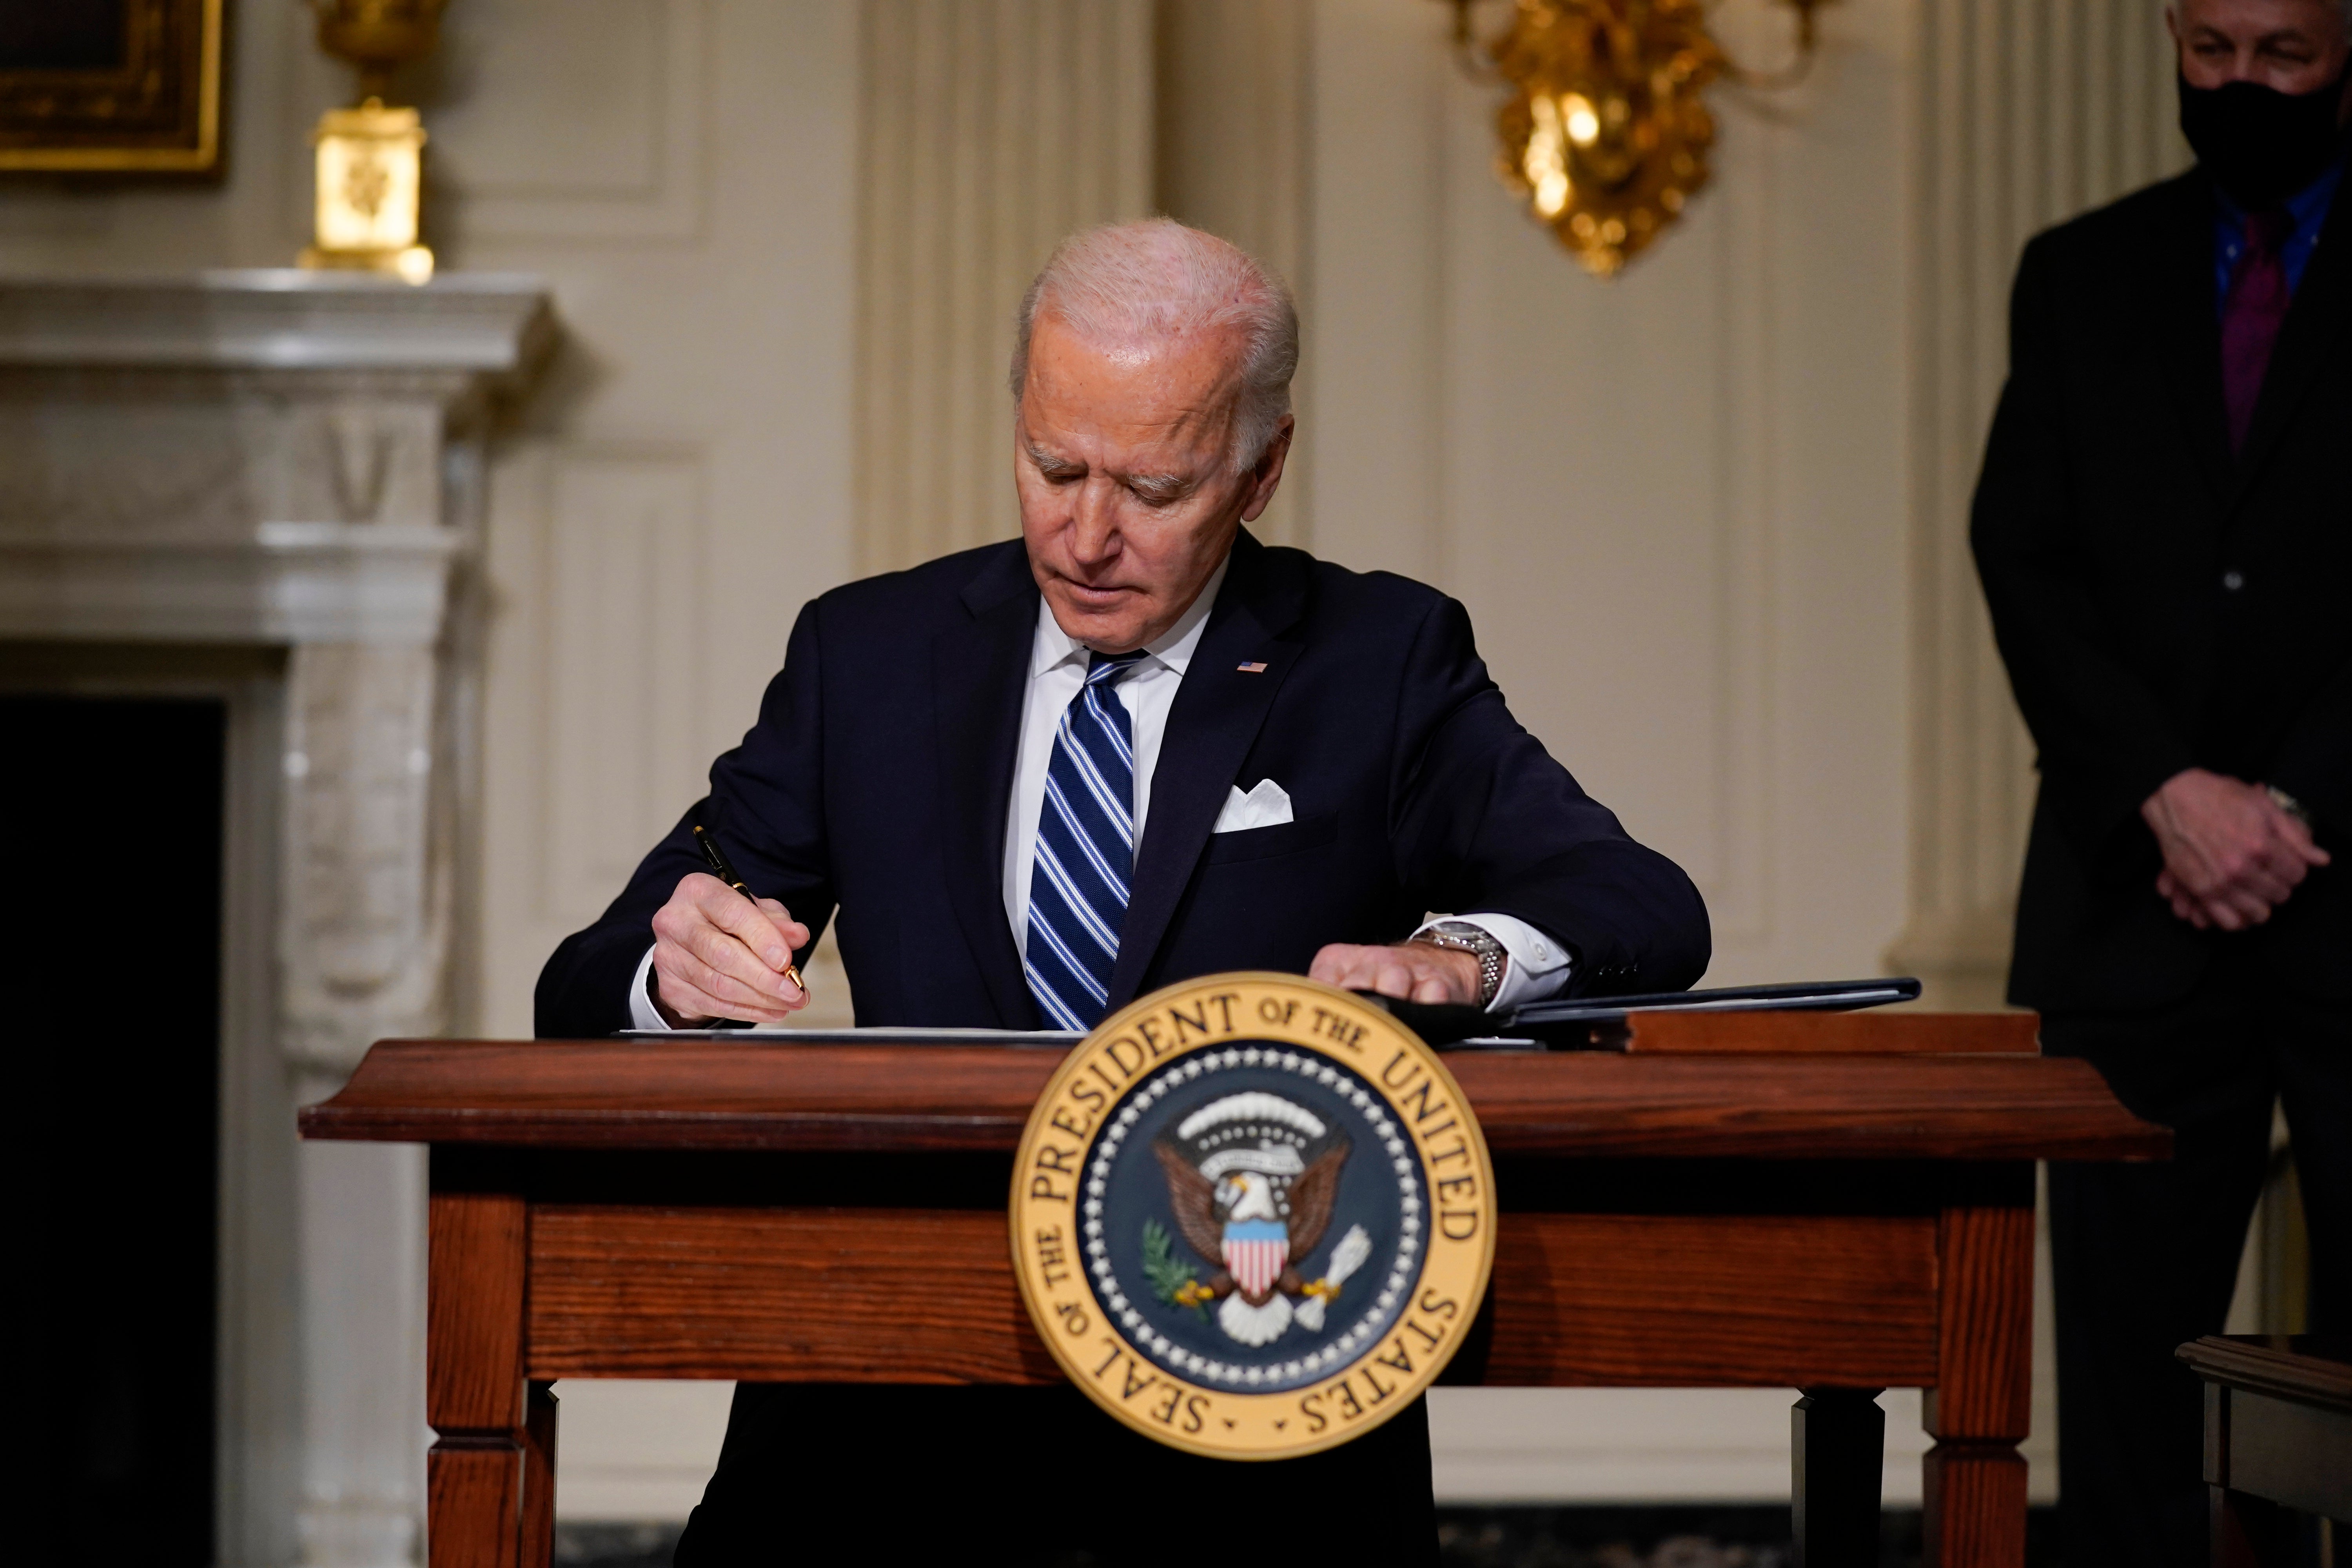 Biden signs an executive order on climate change on Wednesday